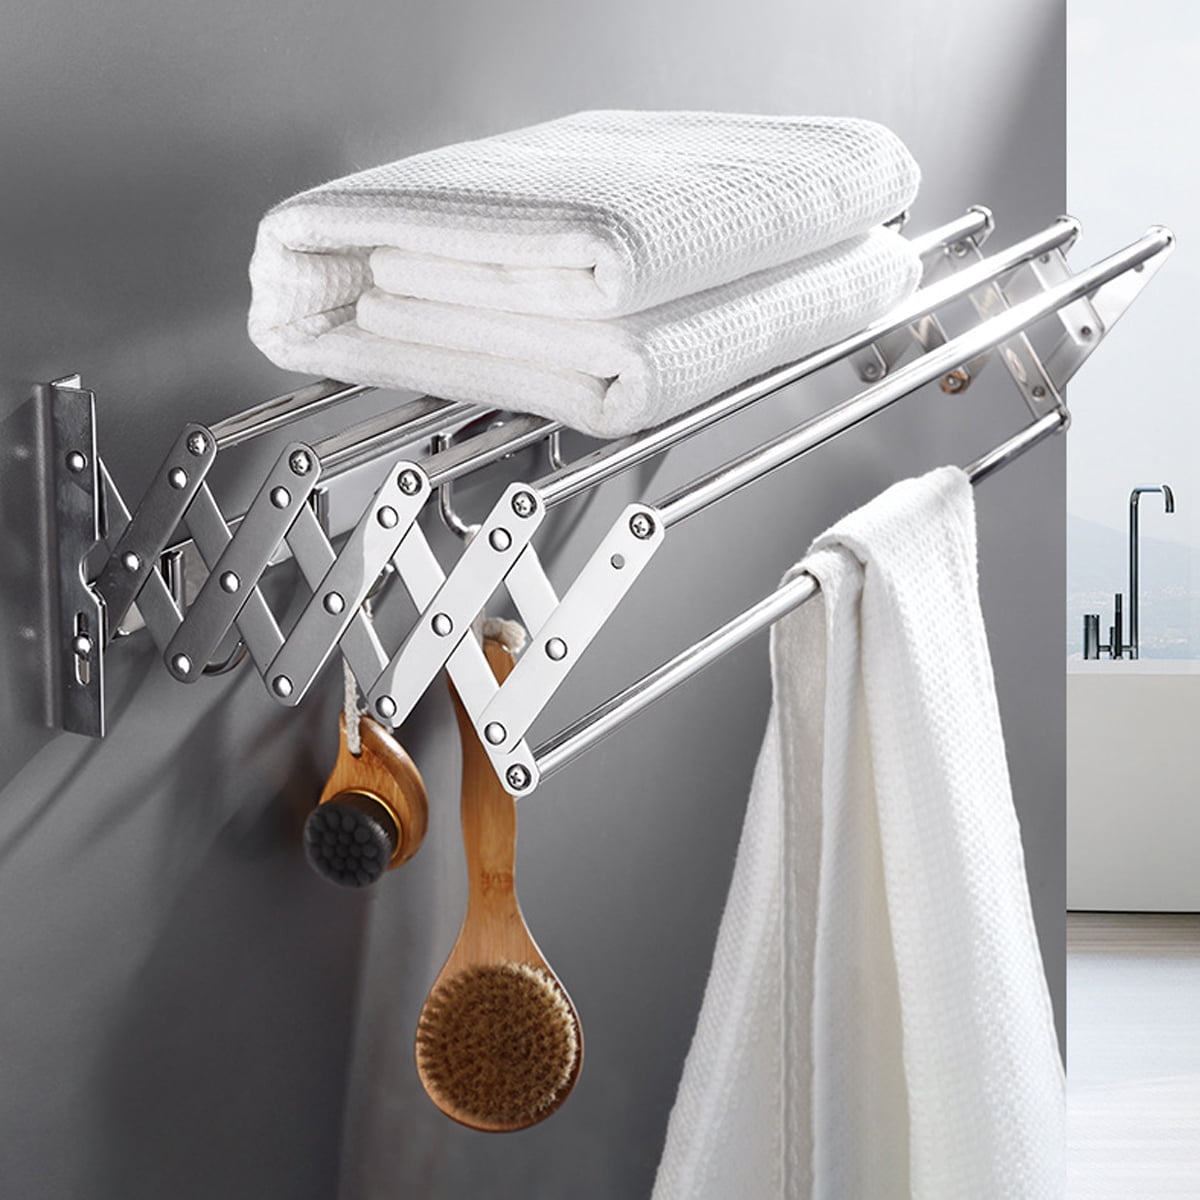 Telescopic Towel Rack Stainless Wall-Mounted Towel Bar, Accordion